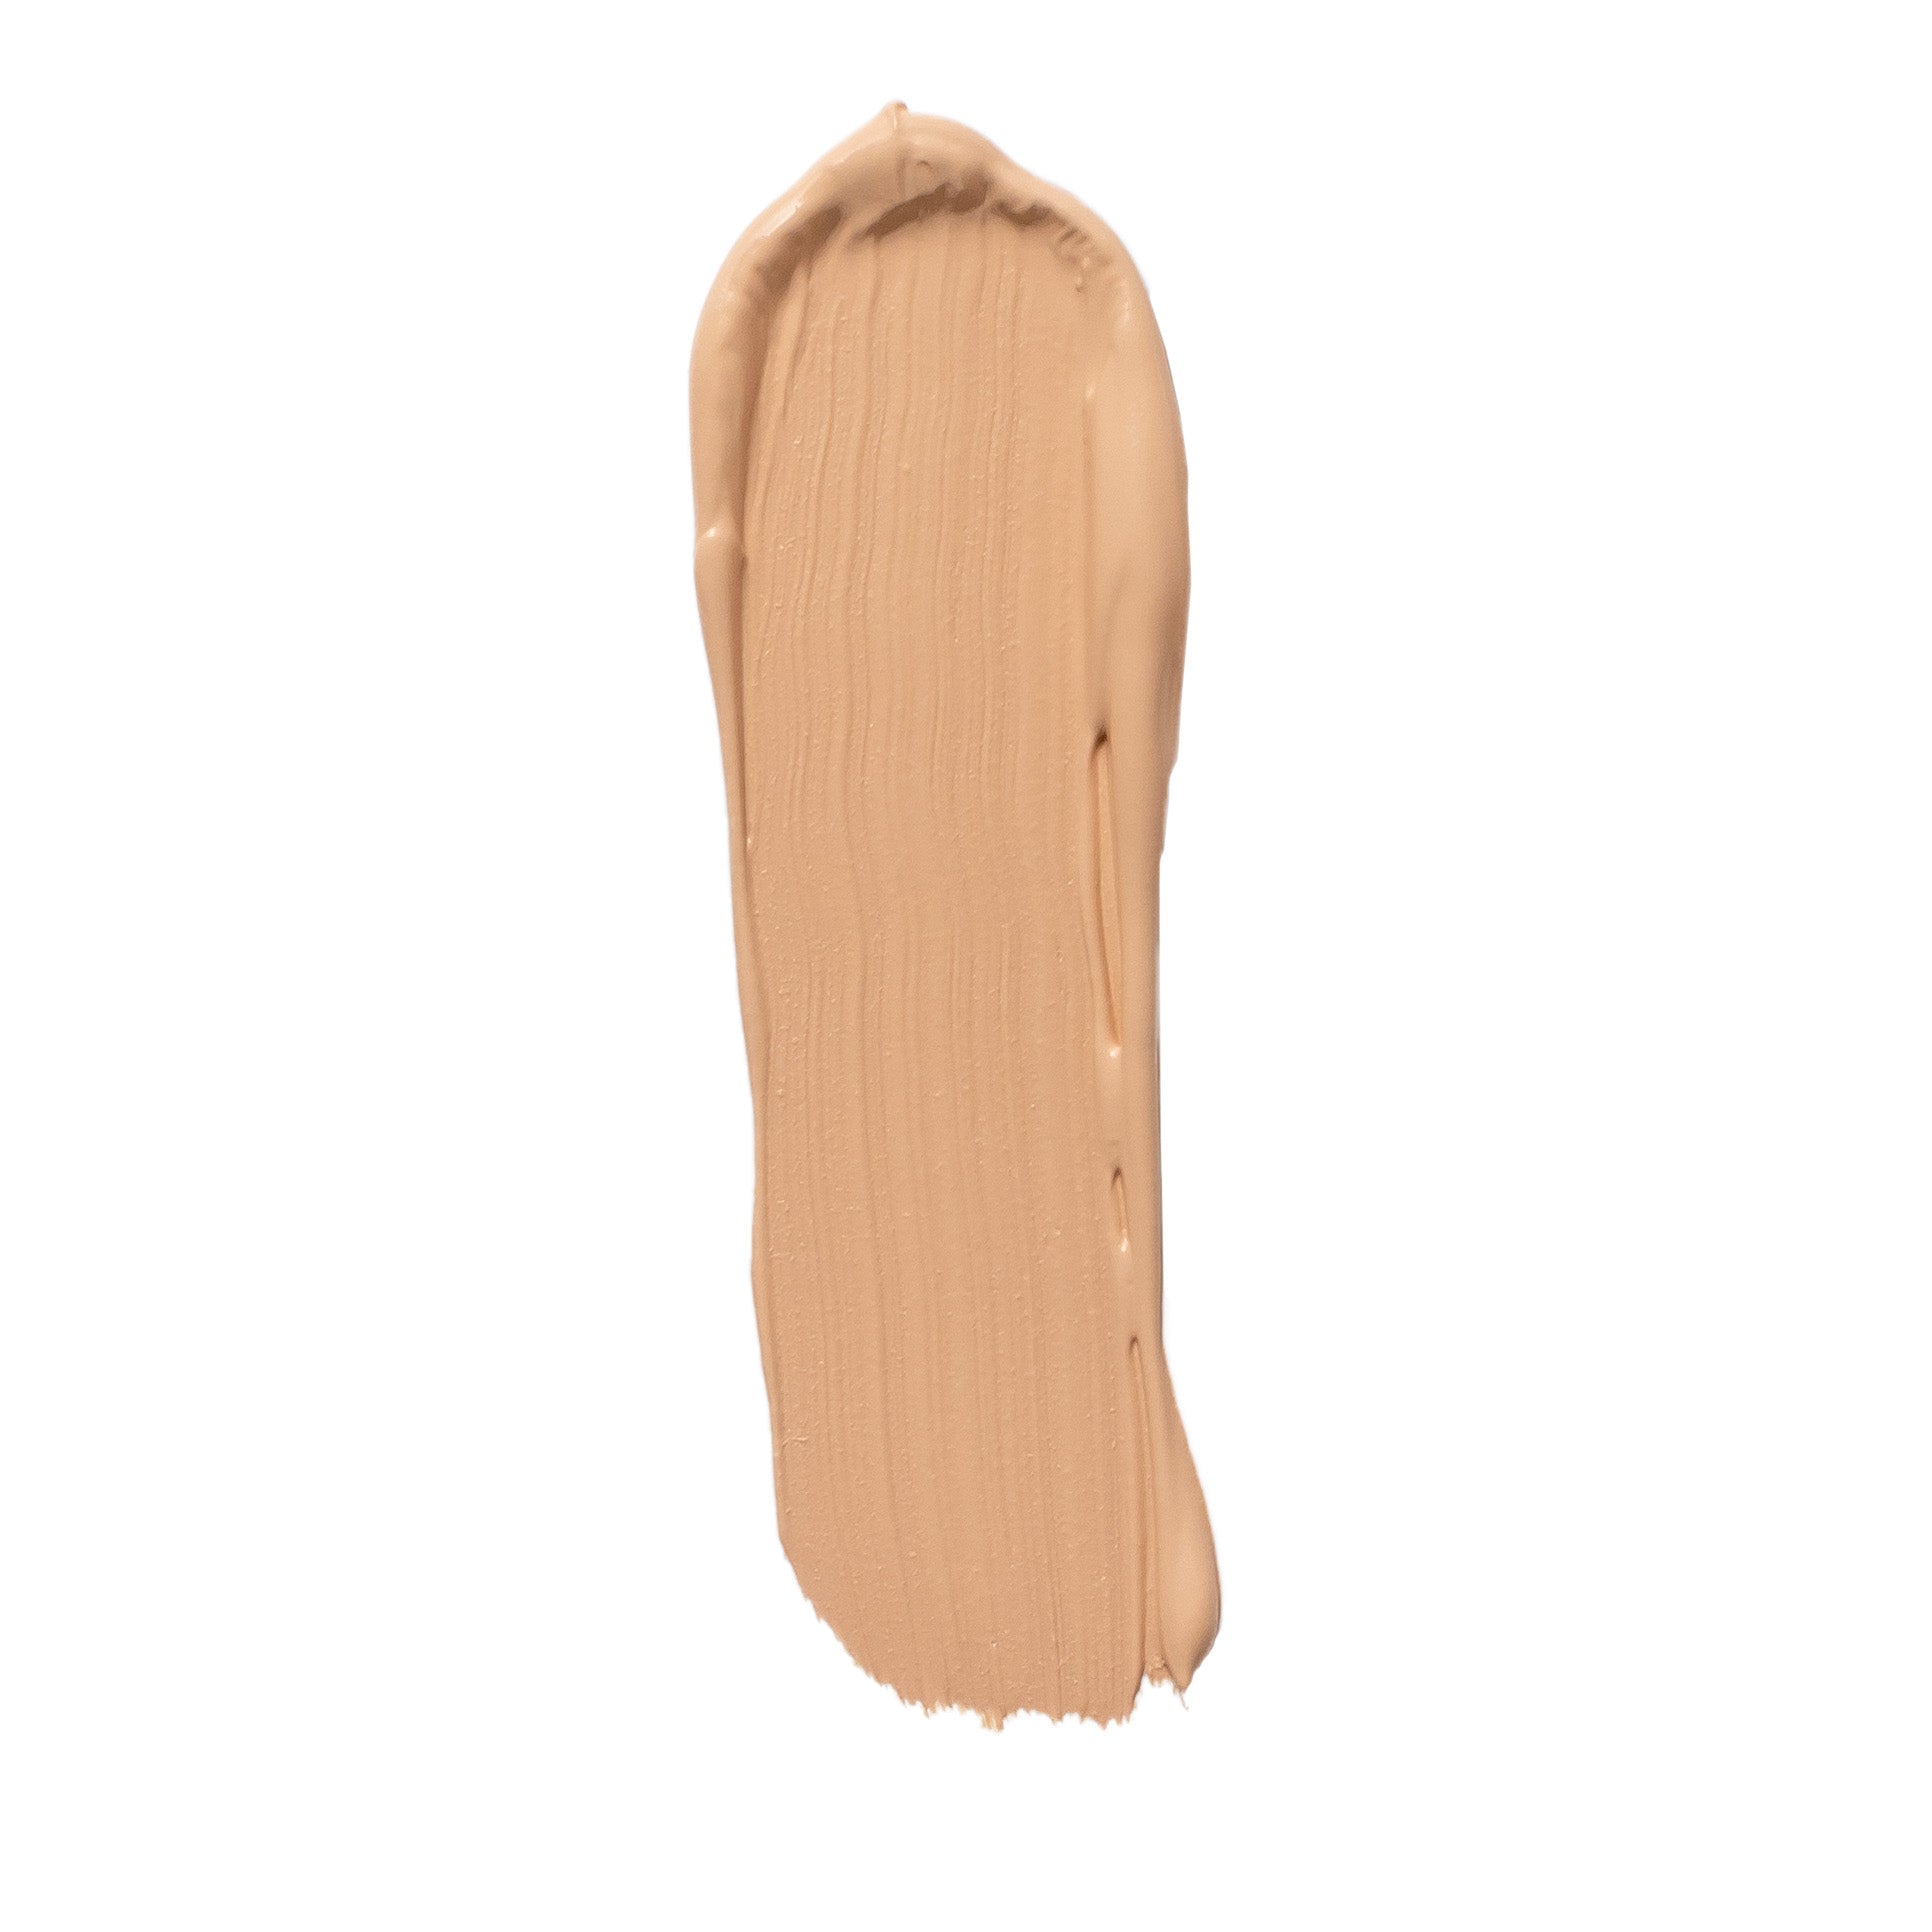 bPerfect CHROMA Cover Matte Foundation, C3 swatch